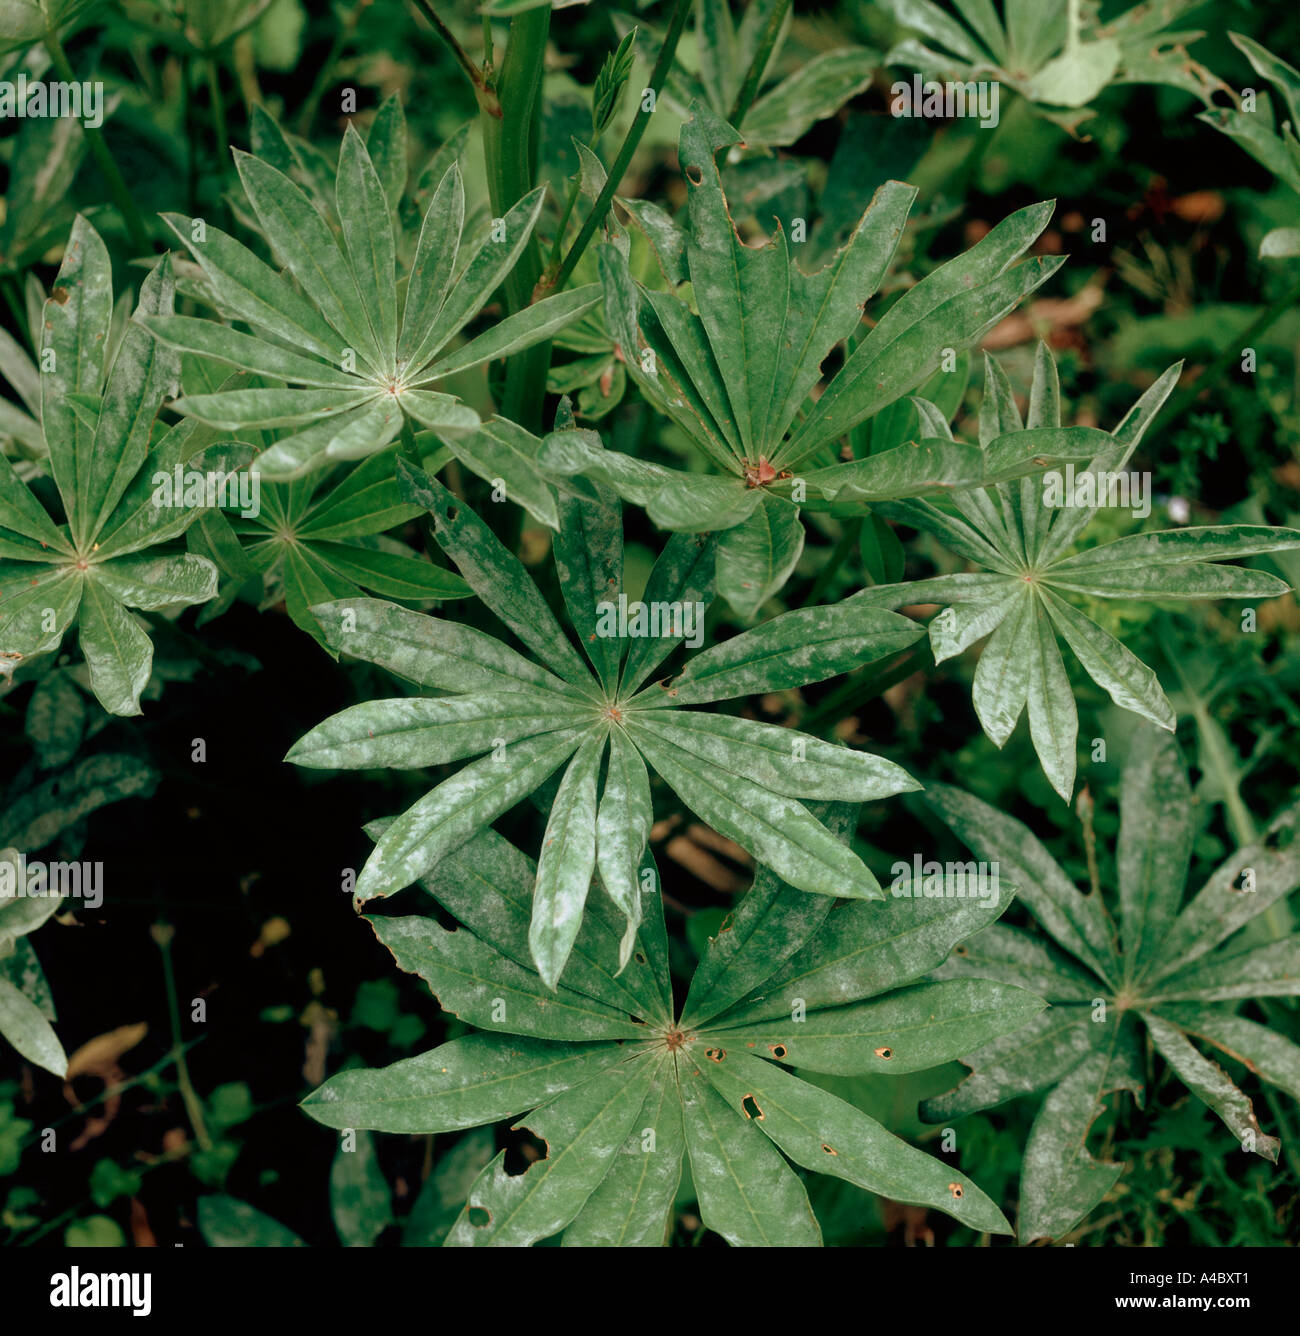 Powdery mildew on lupin leaves Stock Photo